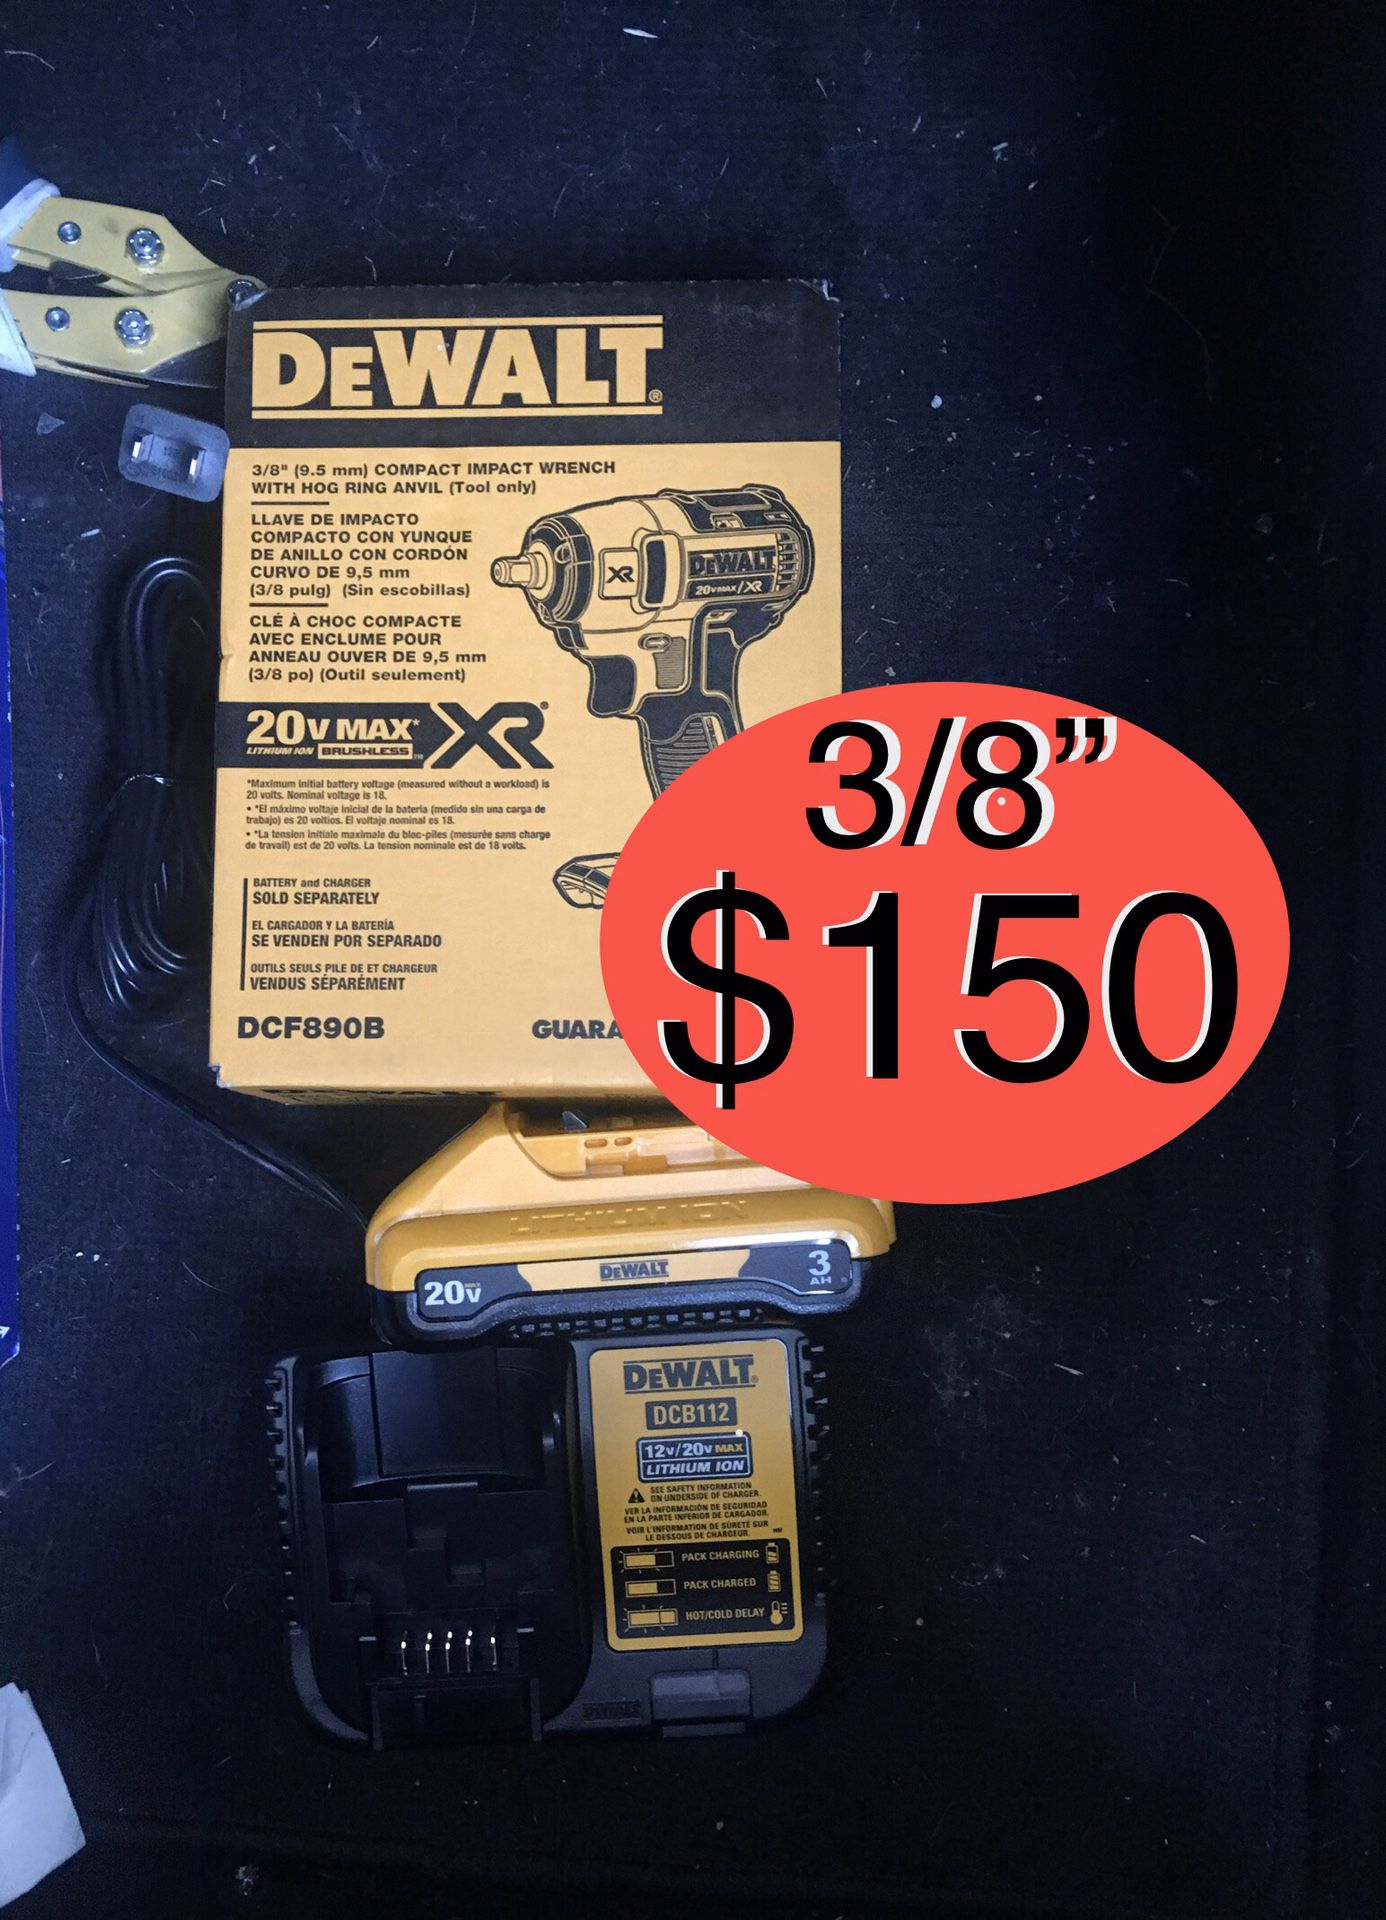 Dewalt impact wrench 3/8” + 3.0 + charger $150